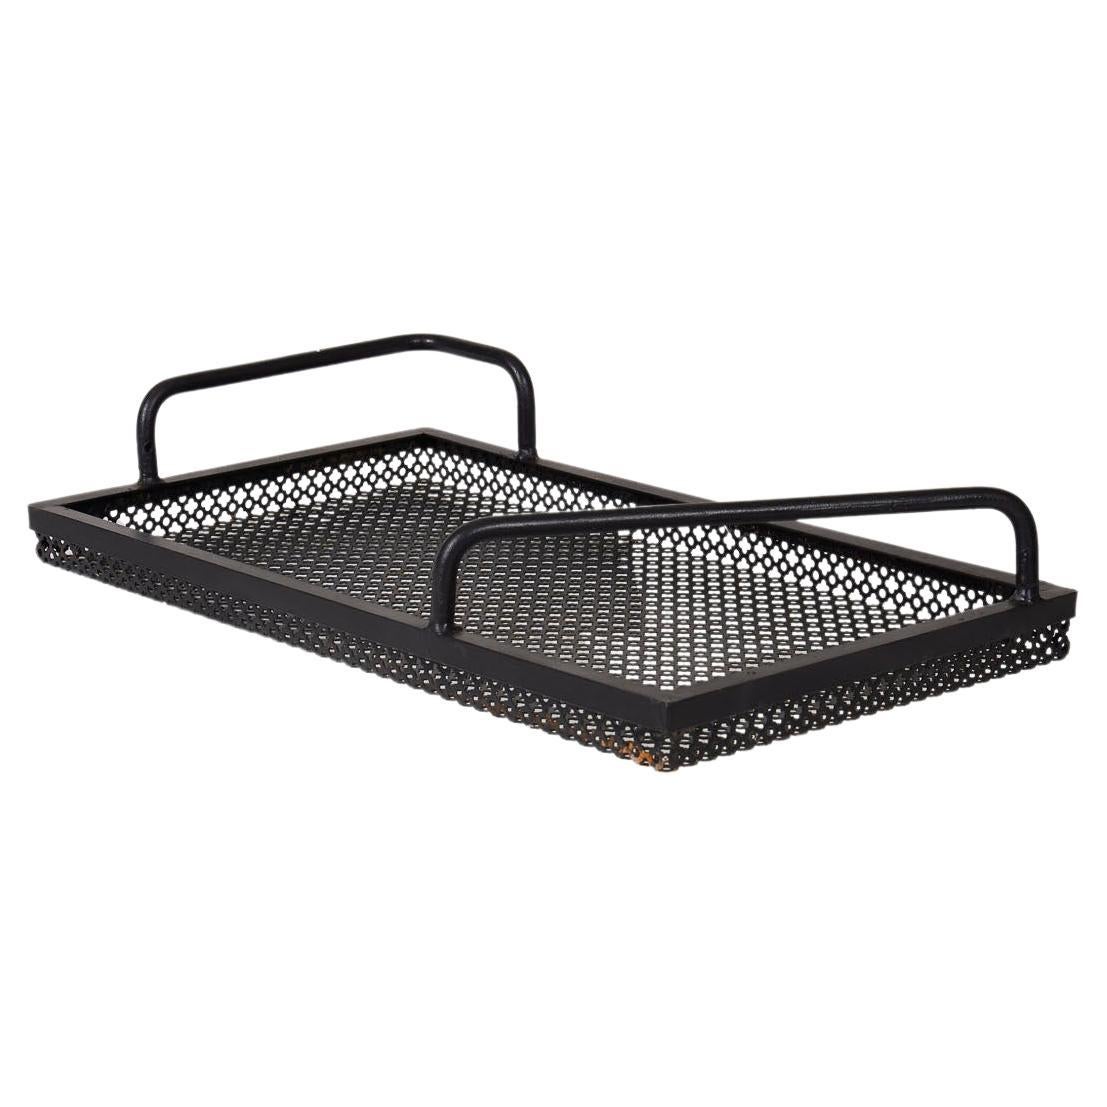 Perforated metal tray